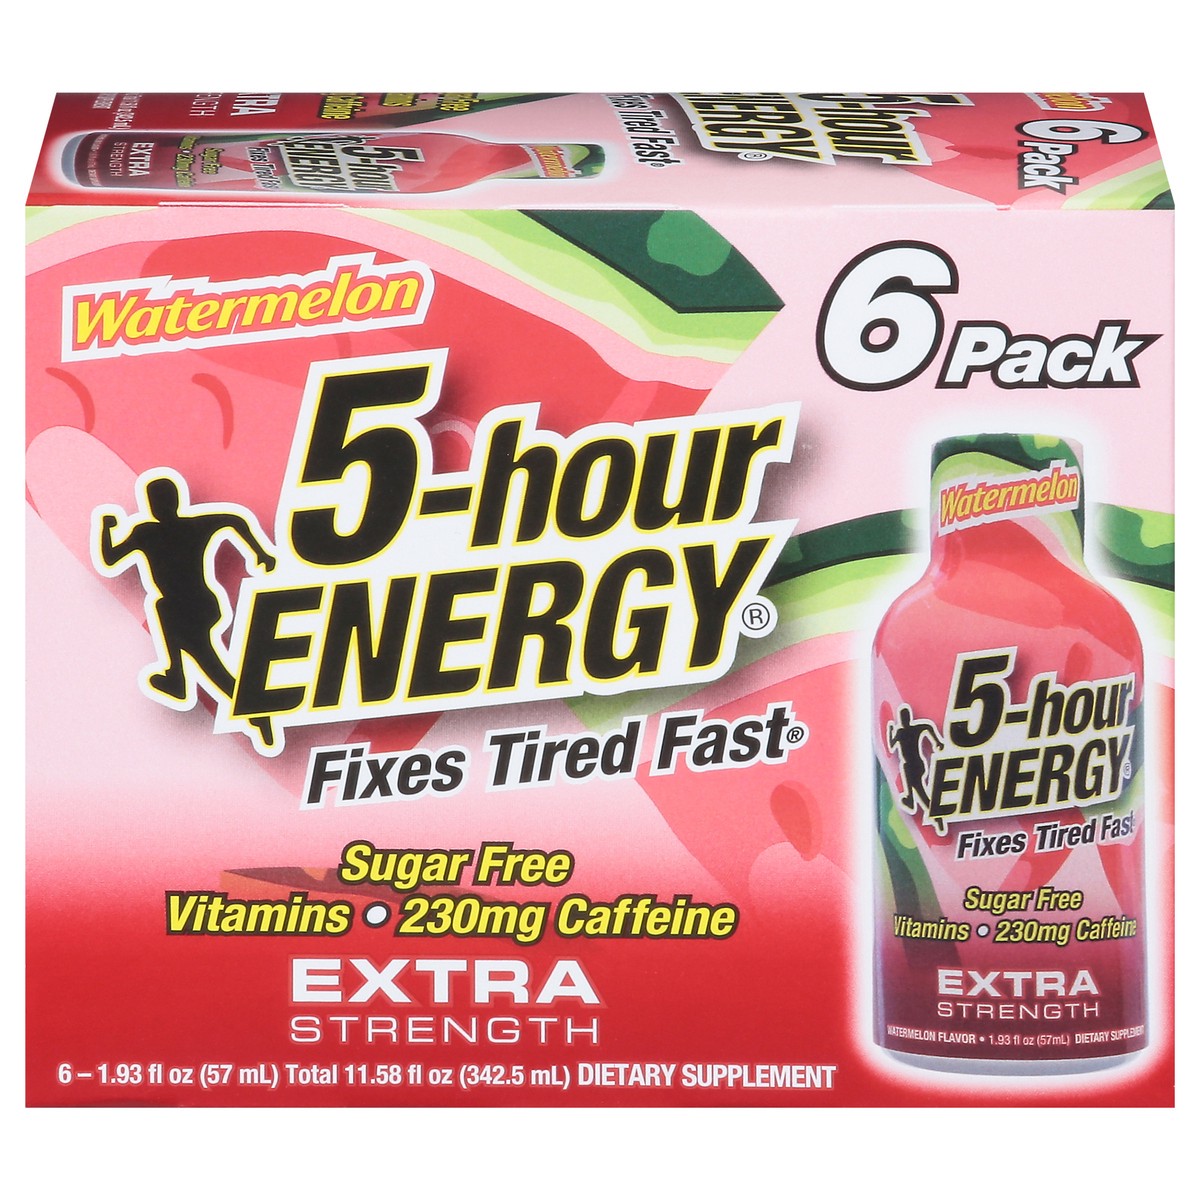 slide 5 of 15, 5-hour ENERGY 5-Hour Watermelon Extra Strength 6-pack, 6 ct